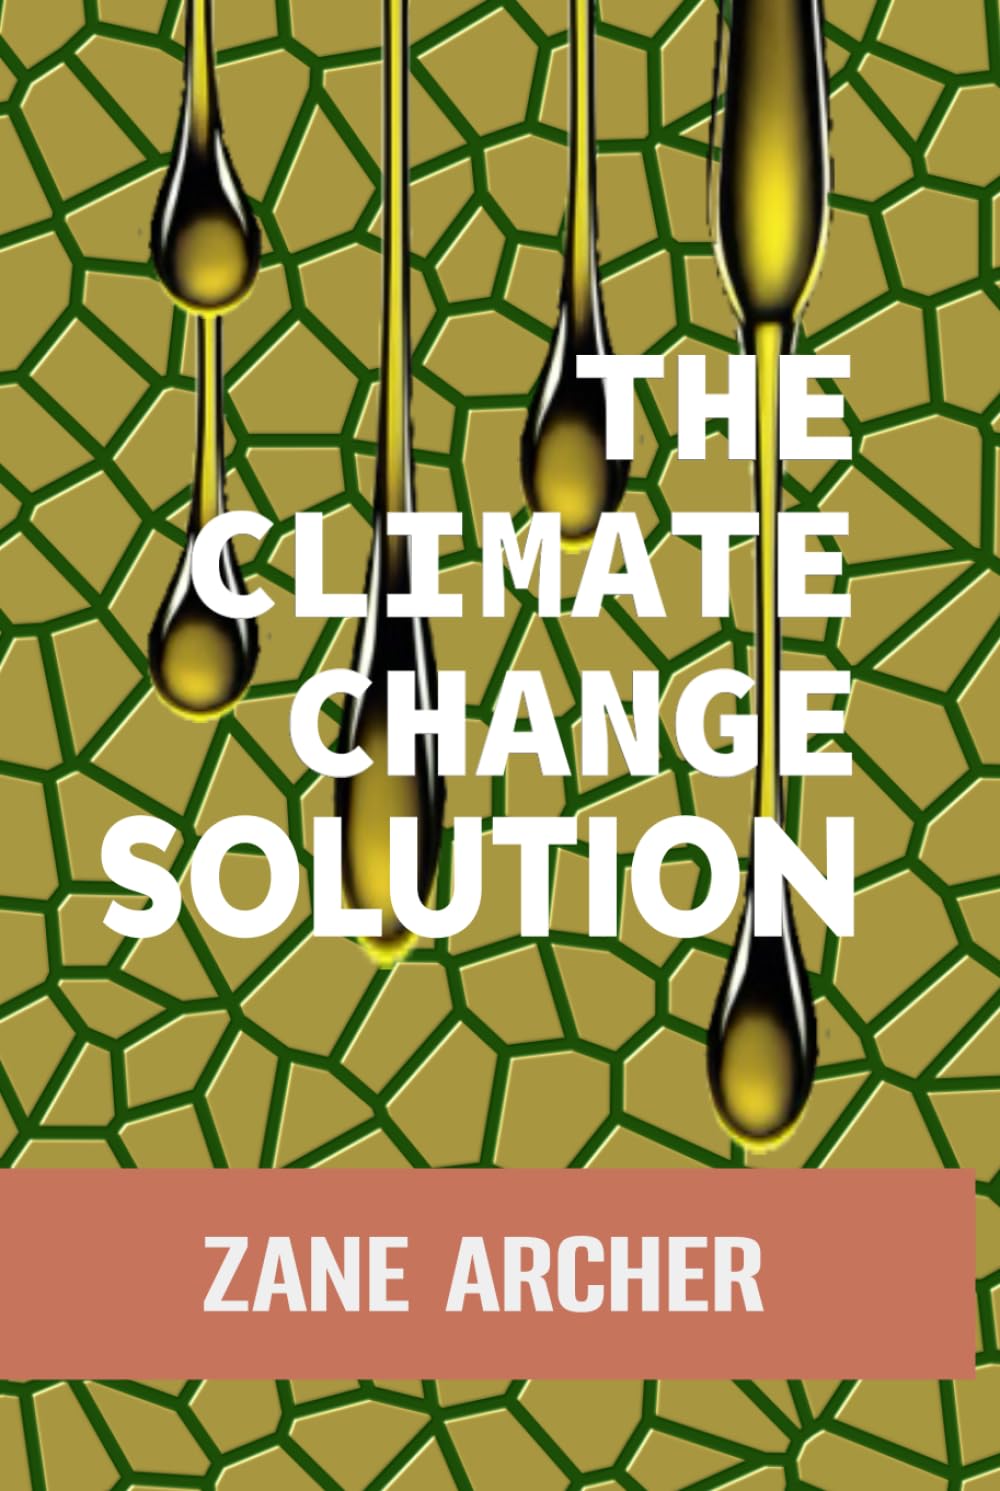 The Climate Change Solution